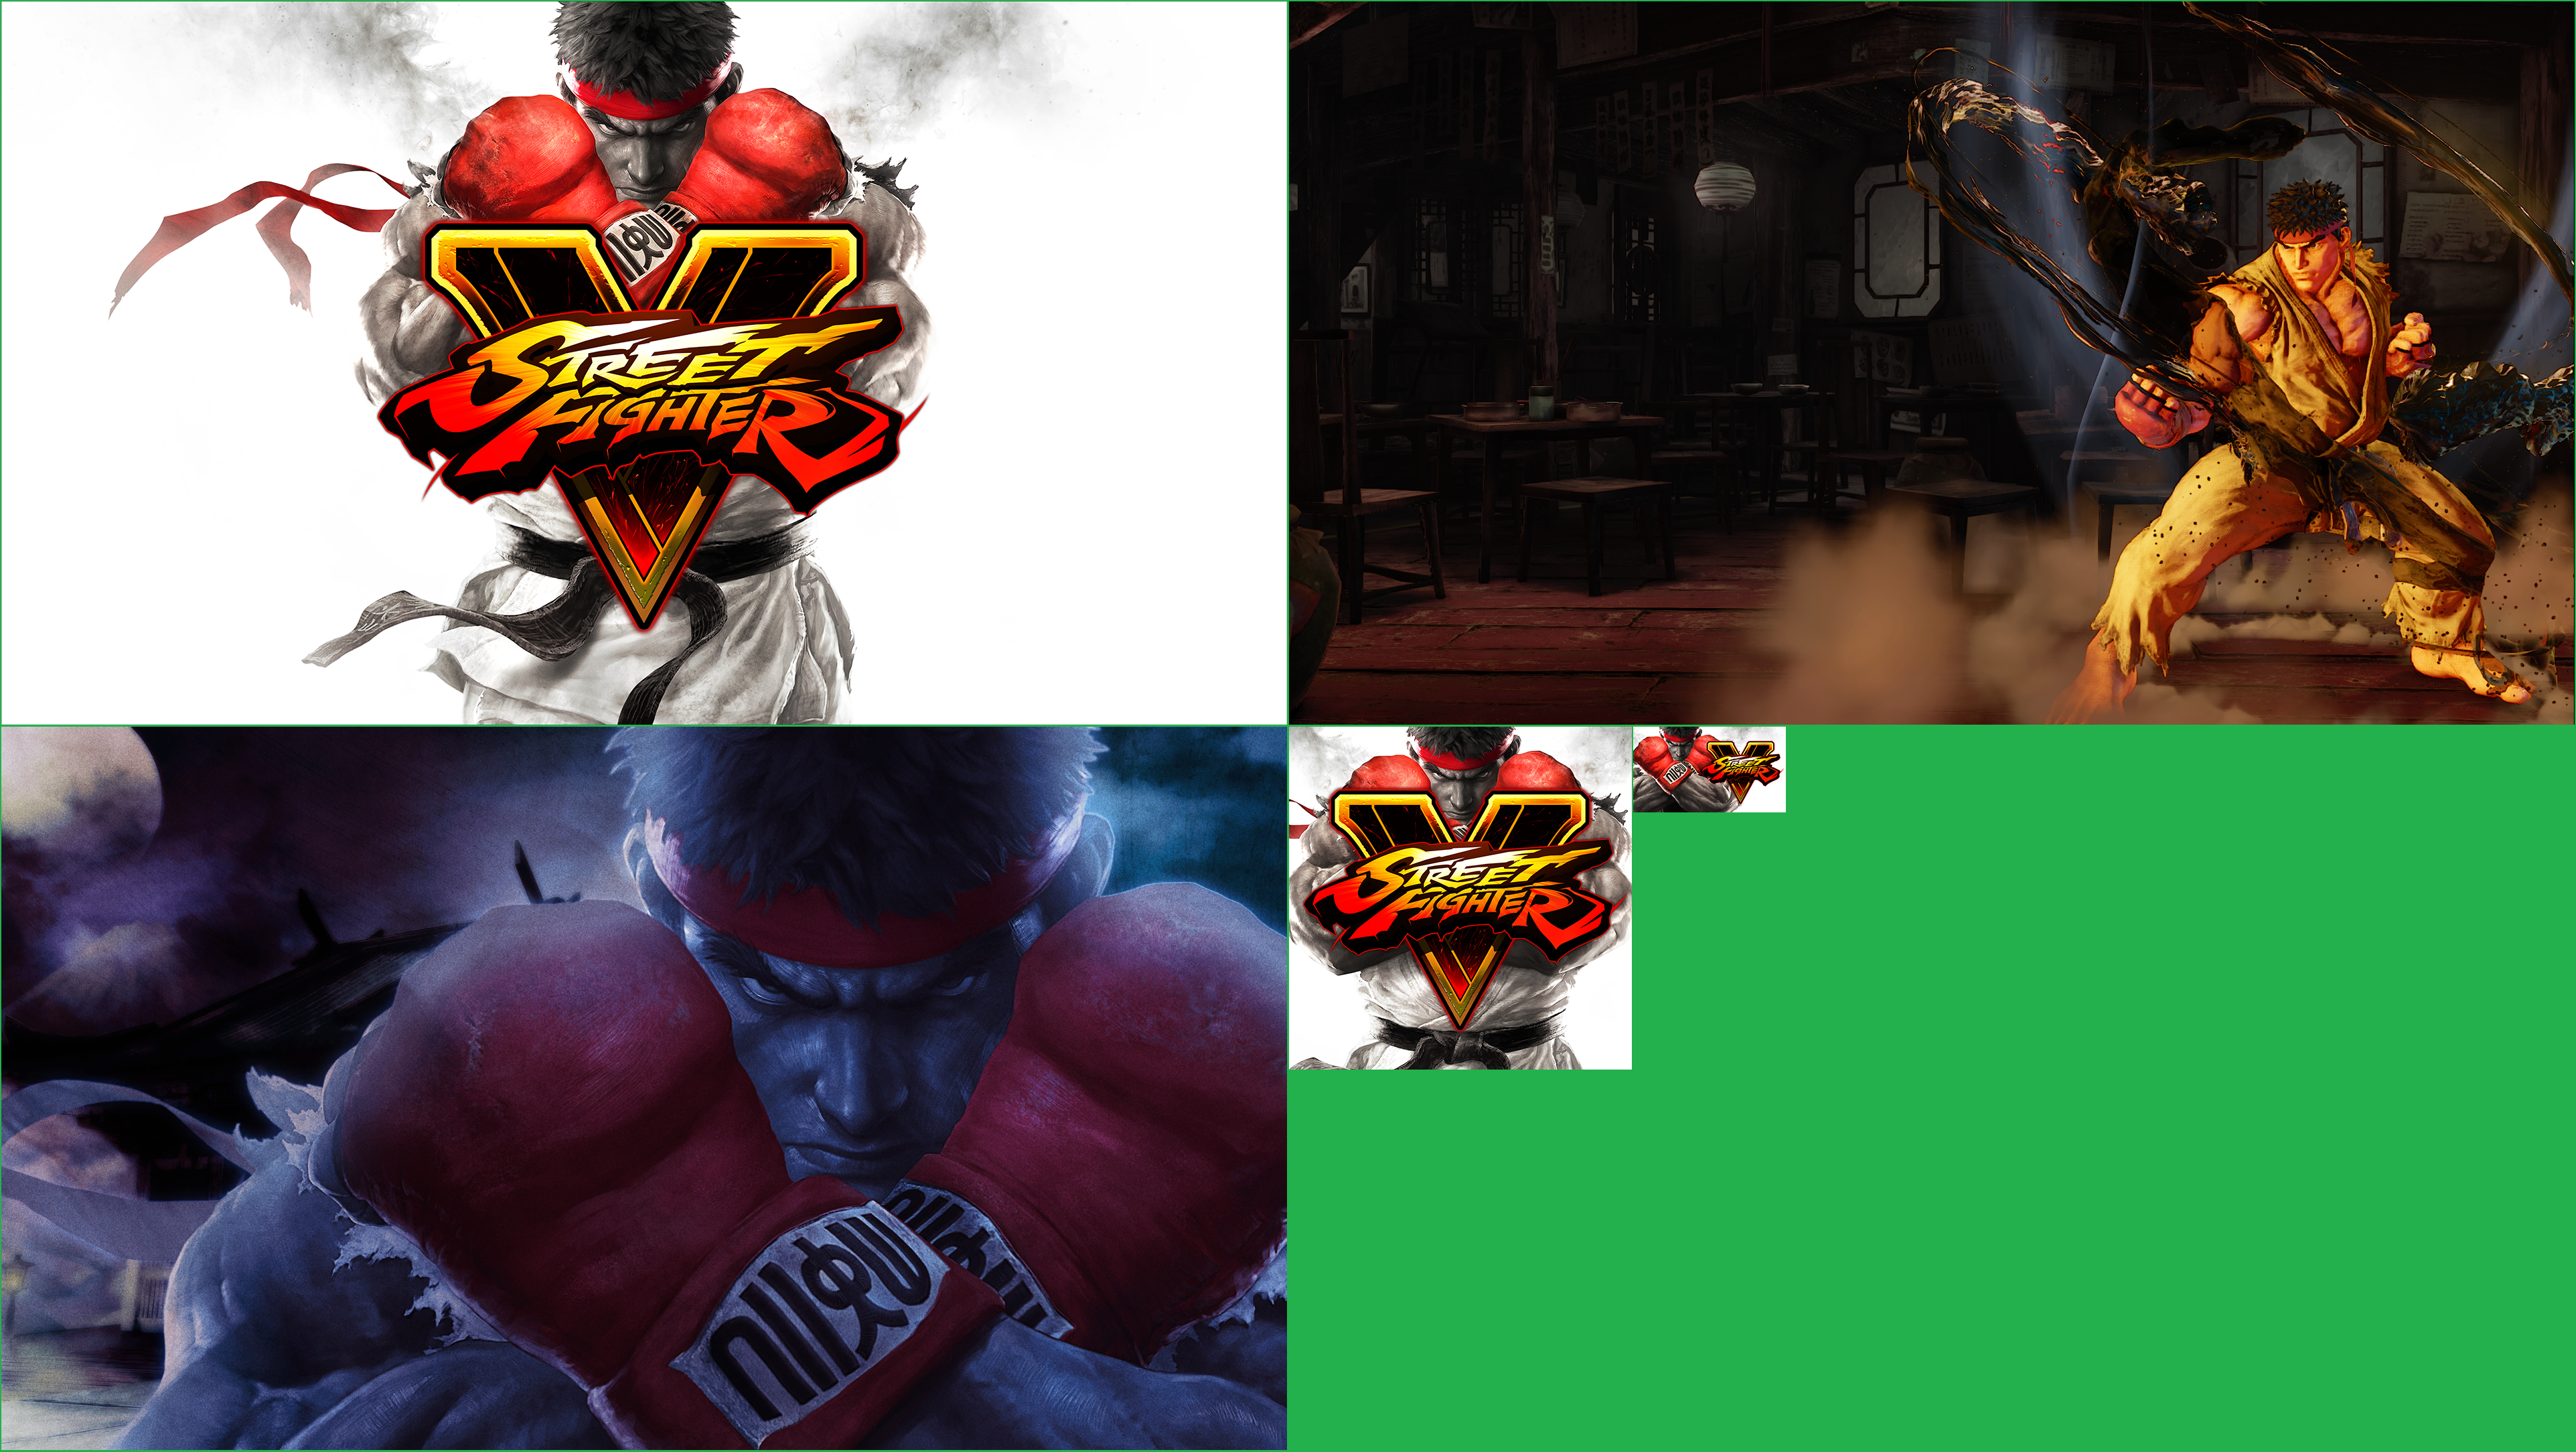 Street Fighter V - PlayStation 4 Icons & Banners (Base Game)